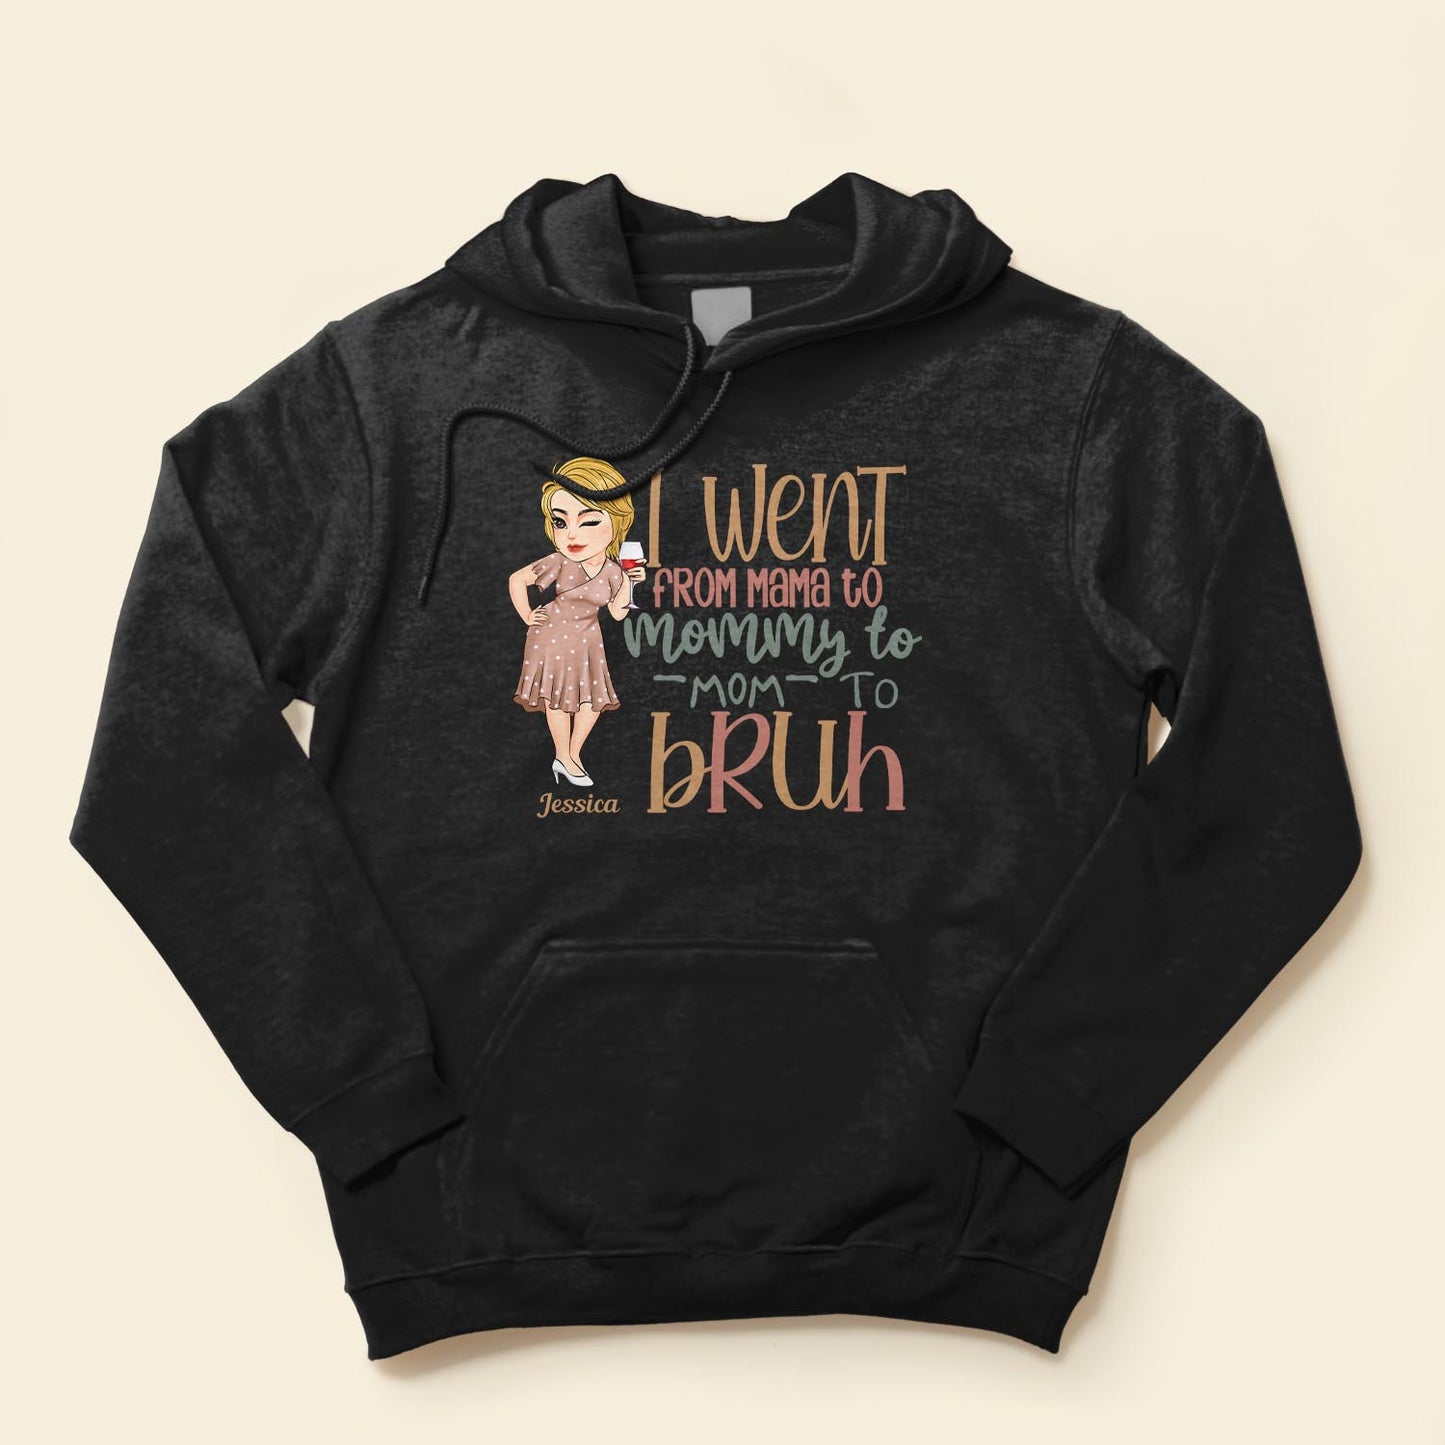 From Mama To Mommy To Mom To Bruh - Personalized Shirt - Birthday, Funny, Mother's Day Gift For Mom, Mother, Wife, Grandma, Nana